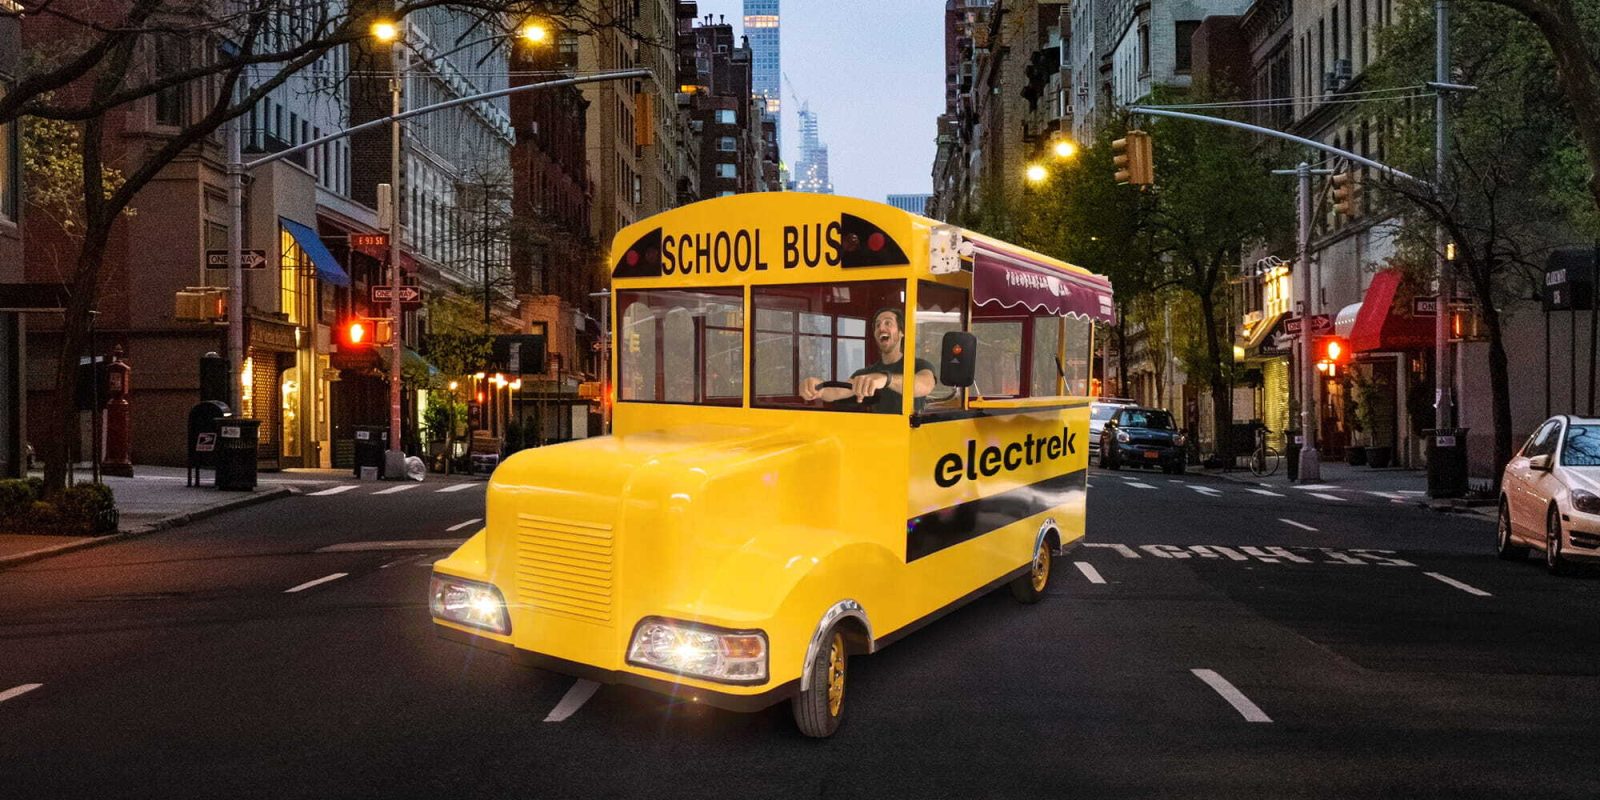 Weird Alibaba: Anyone want a $2,000 school bus-shaped electric food truck from China?